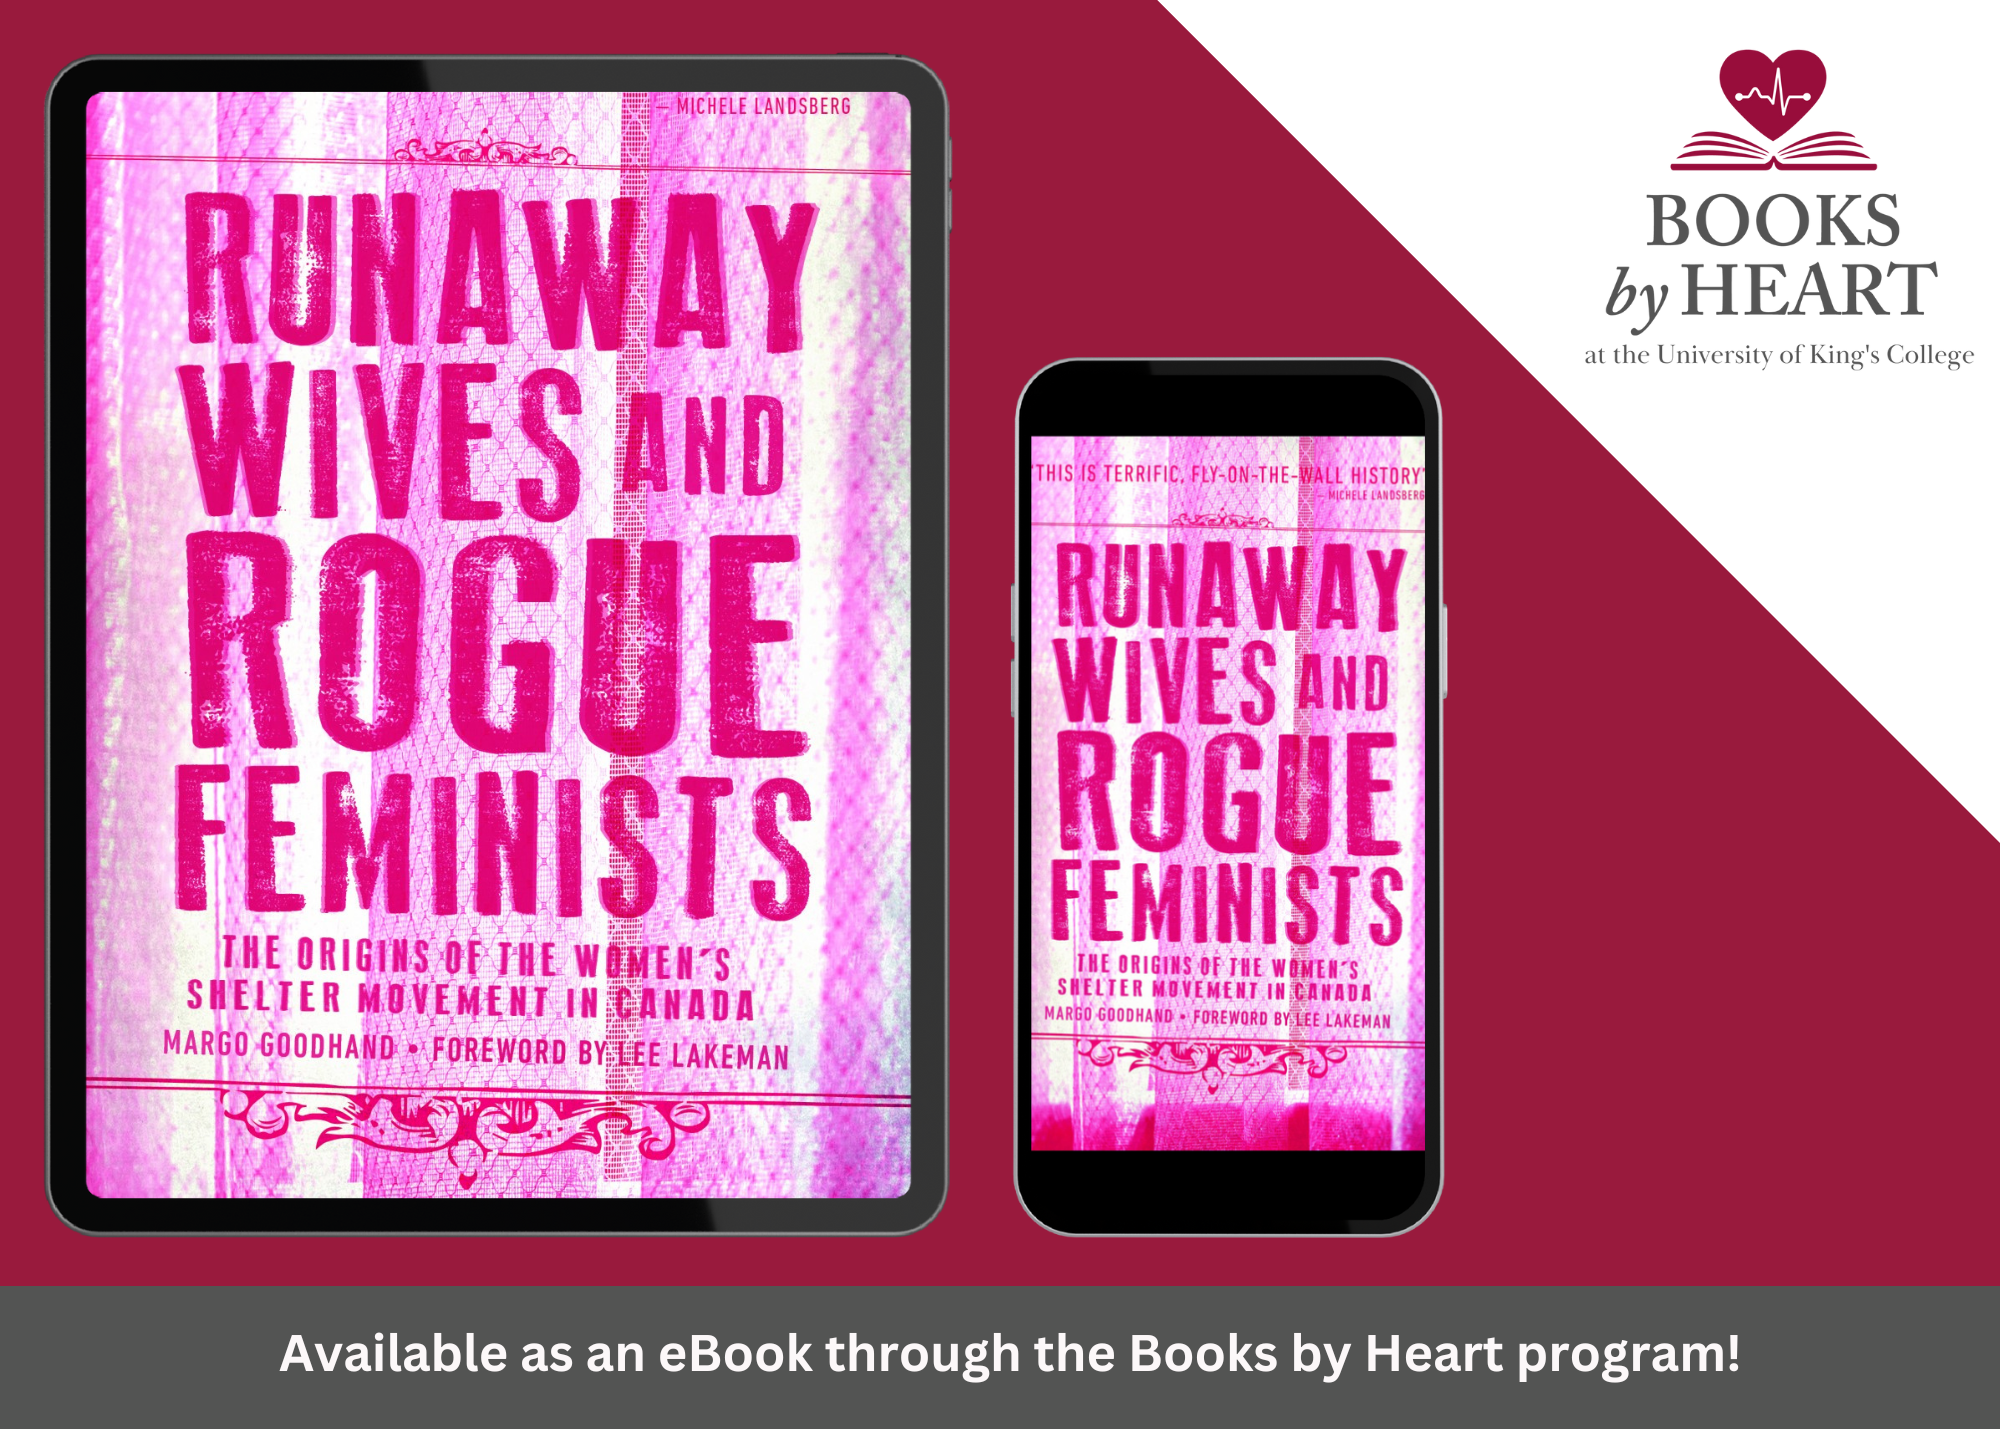 Books By Heart: Runaway Wives and Rogue Feminists